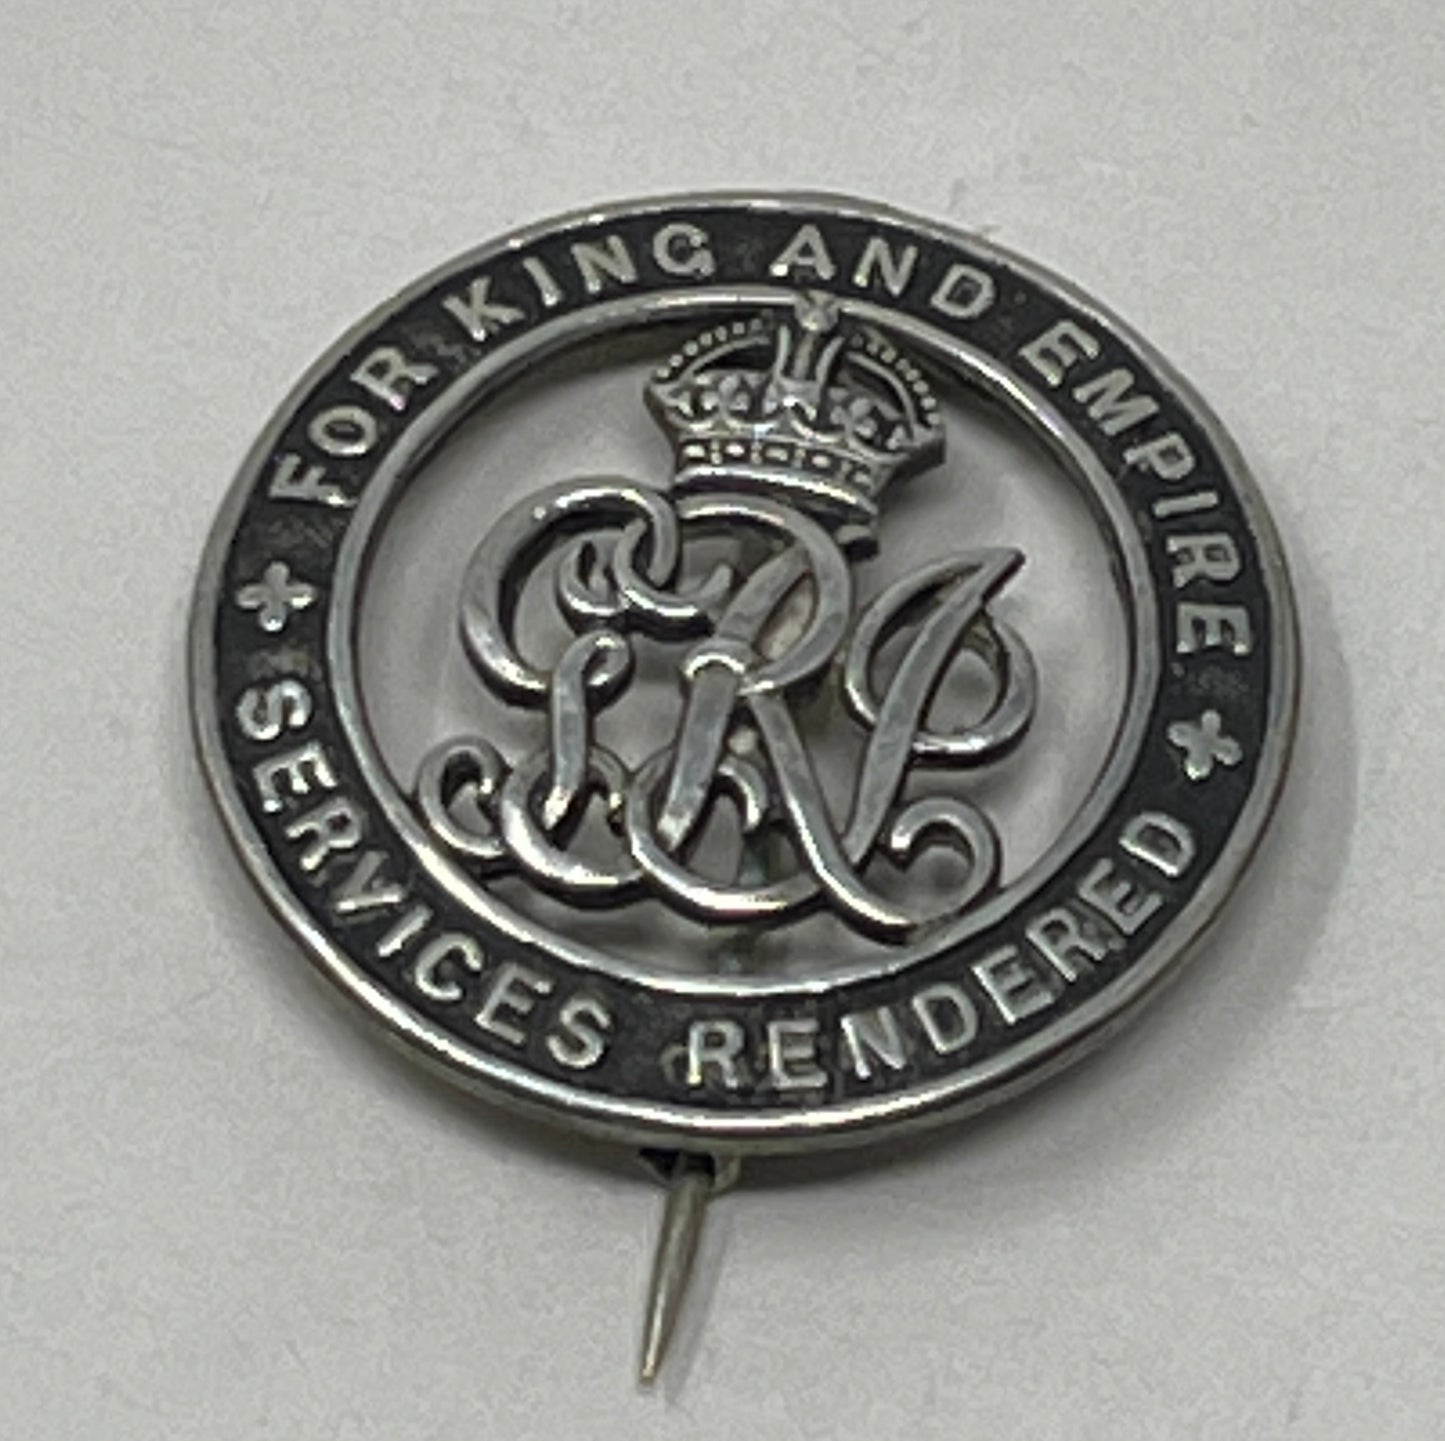 Silver For King And Empire Services Rendered